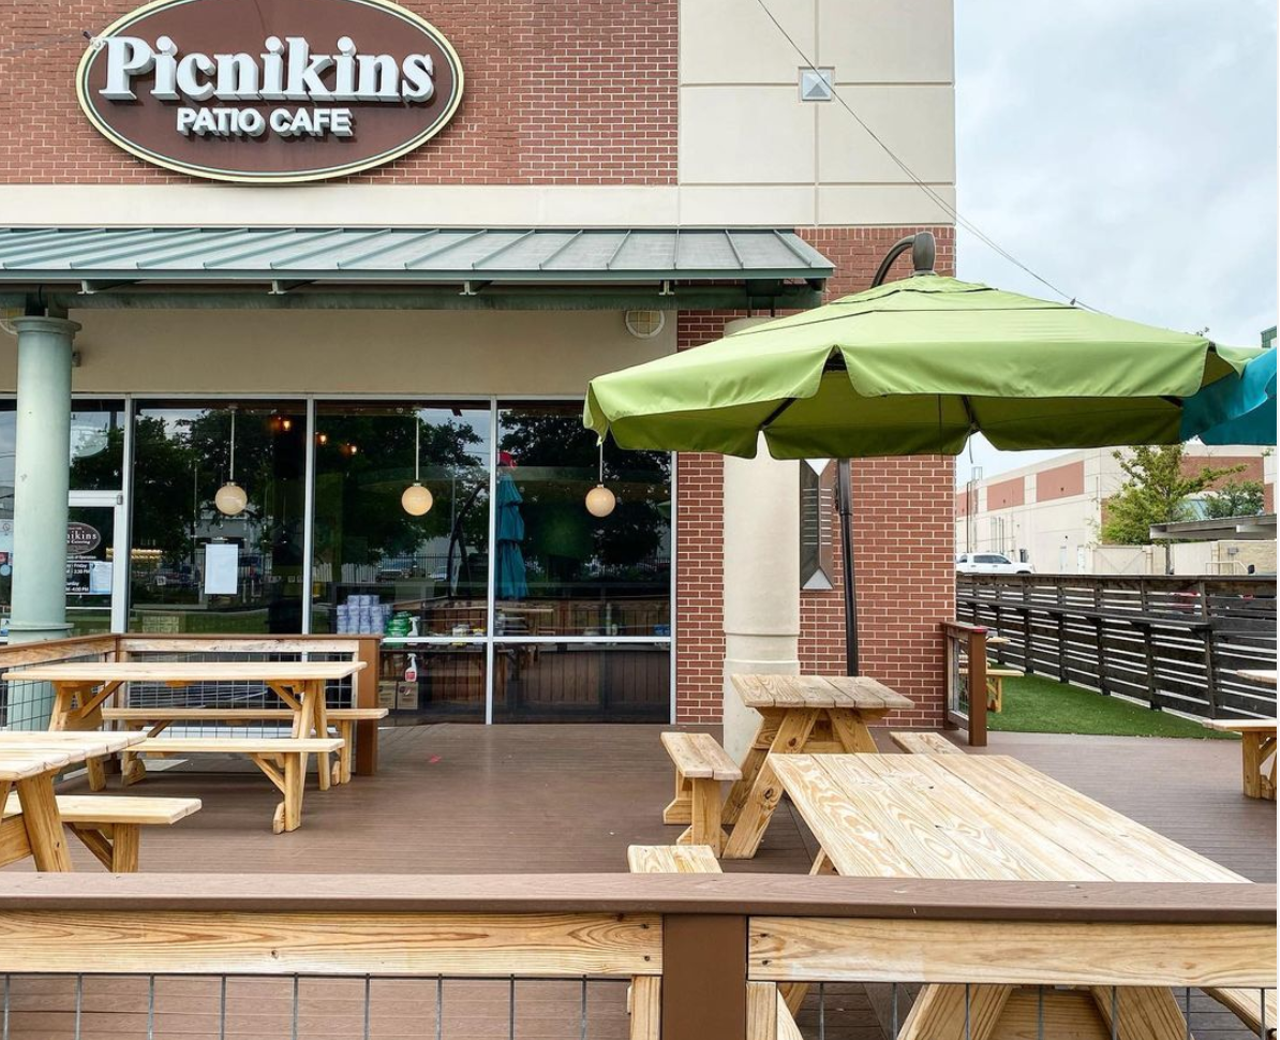 Picnikins Patio Cafe
Masks Required
Multiple Locations, N/A, picnikins.com
You and your pup can enjoy the spring time by being outdoors at Picnikins Patio Cafe. Try one of their Asian salads or if you’re feeling creative, build your own! 
Photo via Instagram / picnikins